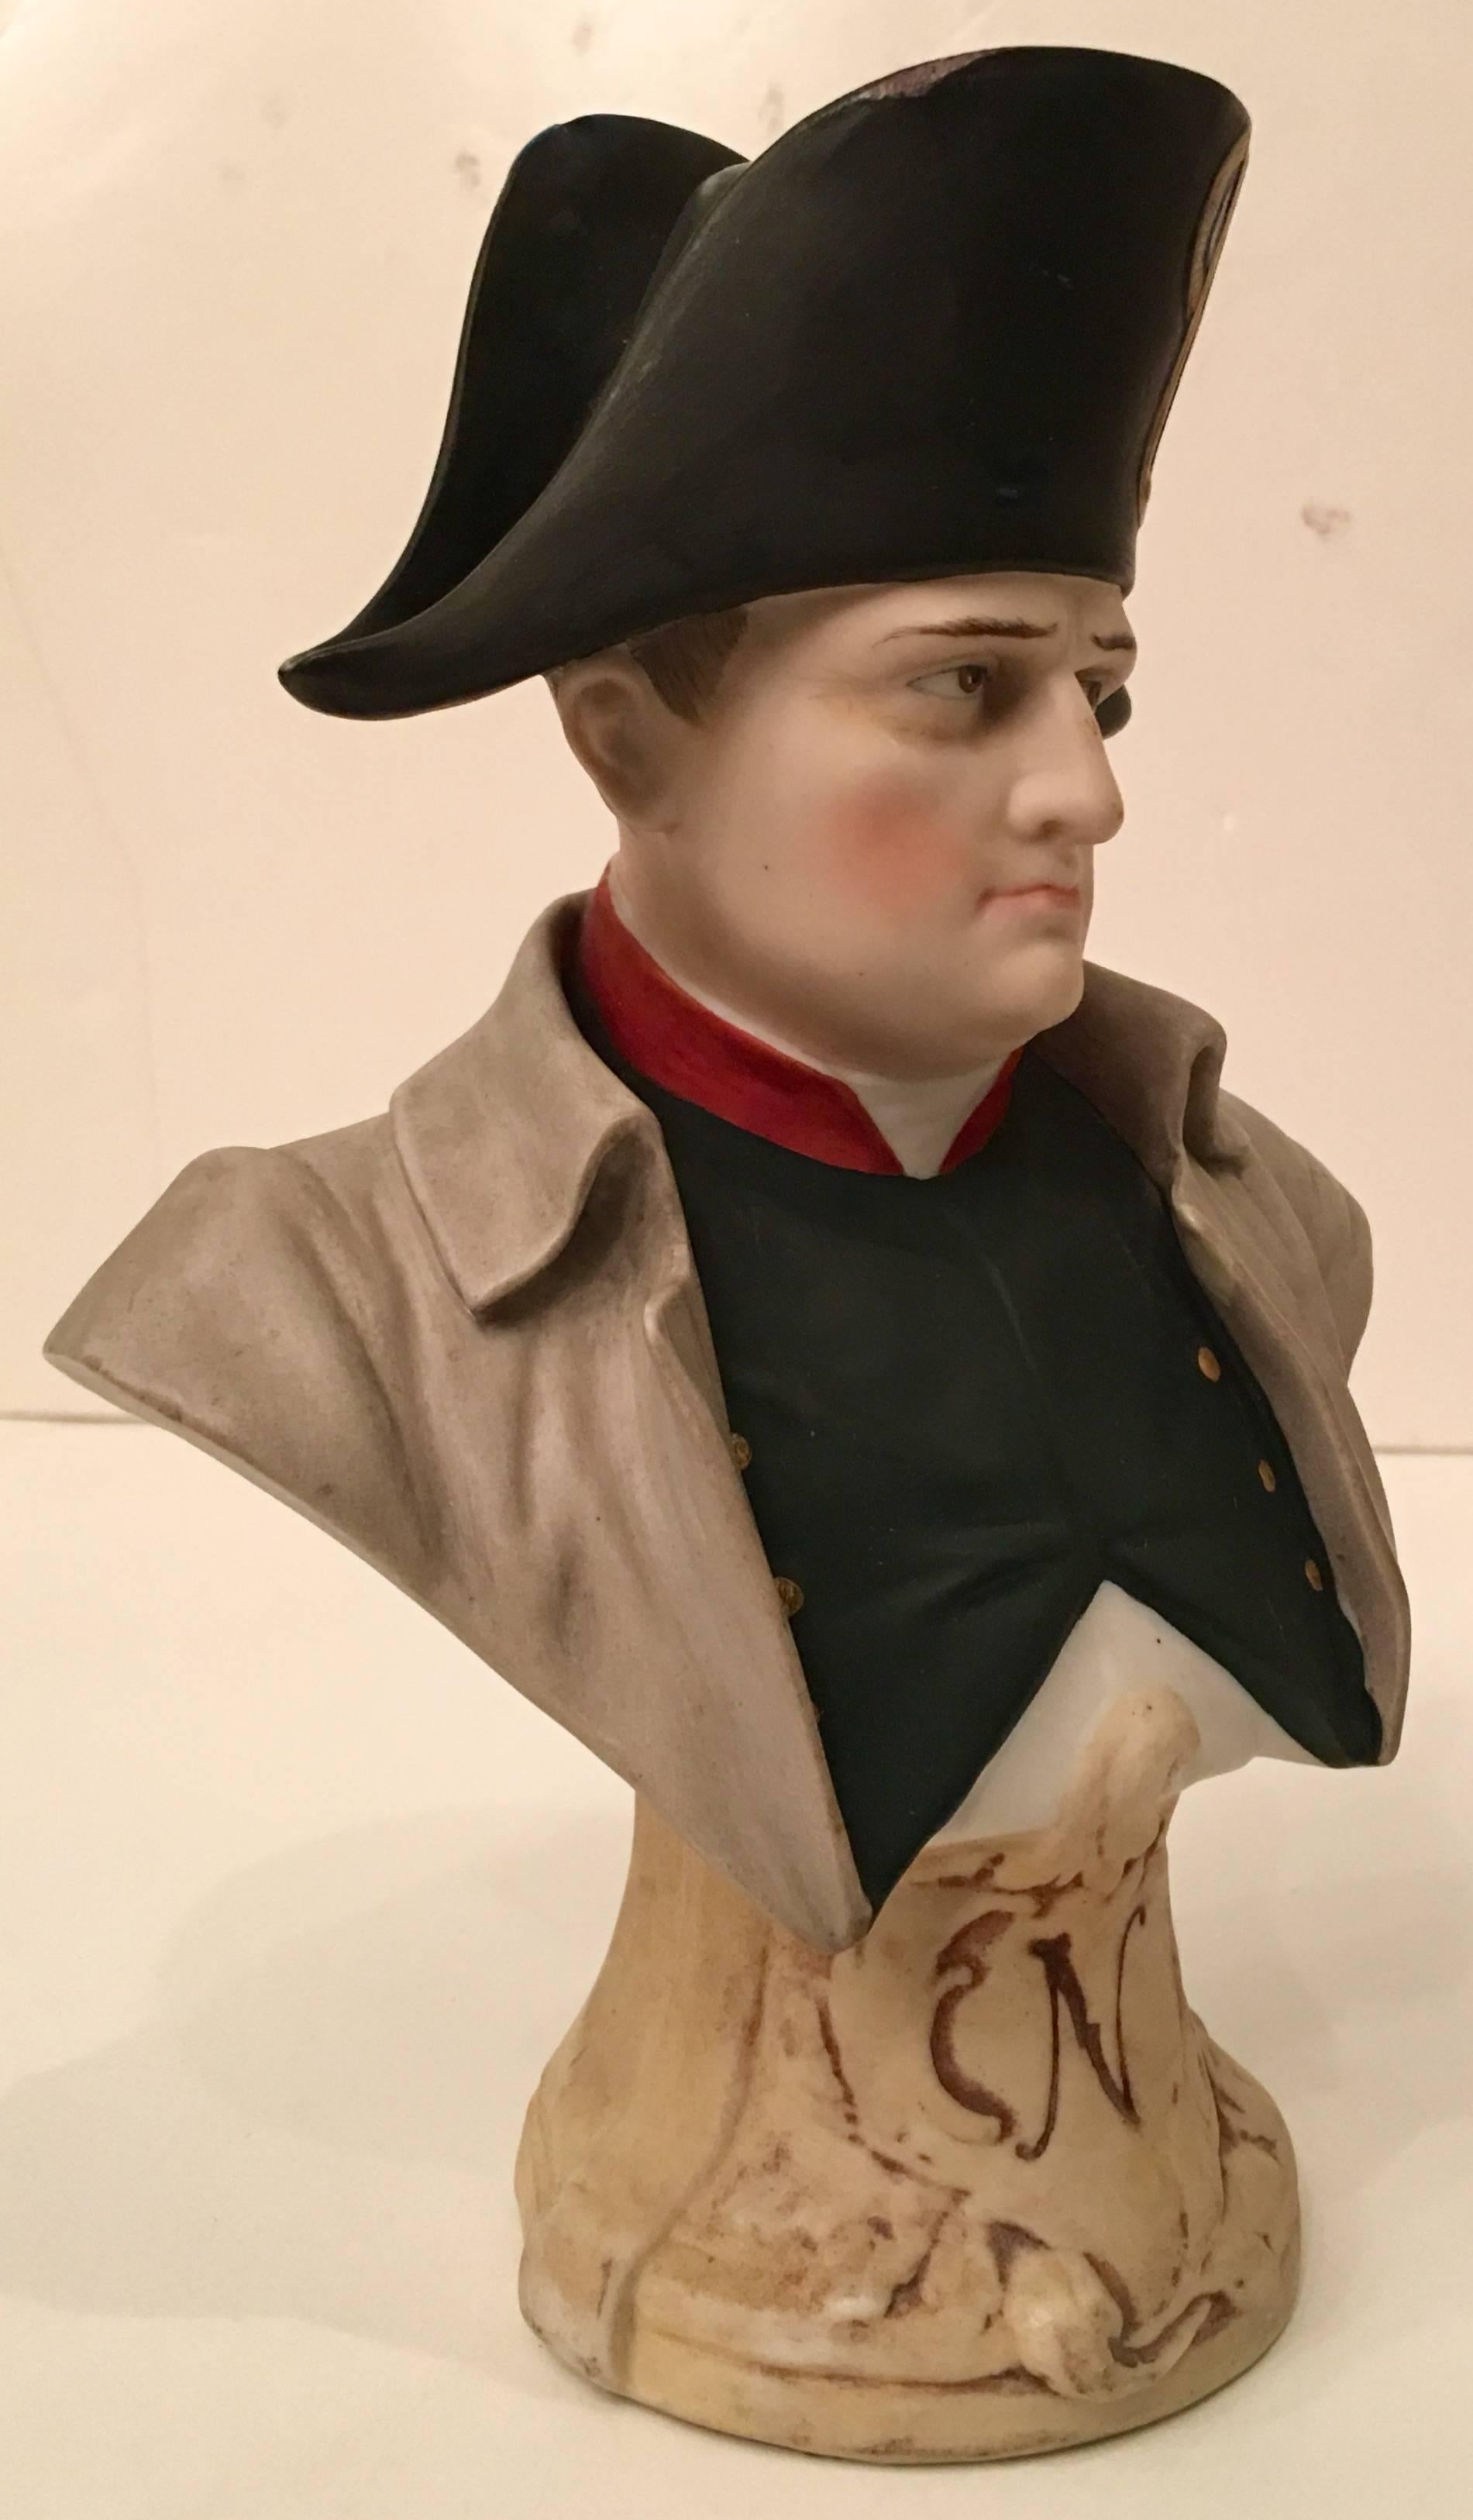 Rare Antique German Meissen Porcelain bust of general Napoleon Bonaparte, raised on a stand. The bust is matte glazed, hand-painted with gold gilt detail. This bust features incredible attention to detail. From the folds of the military costume to